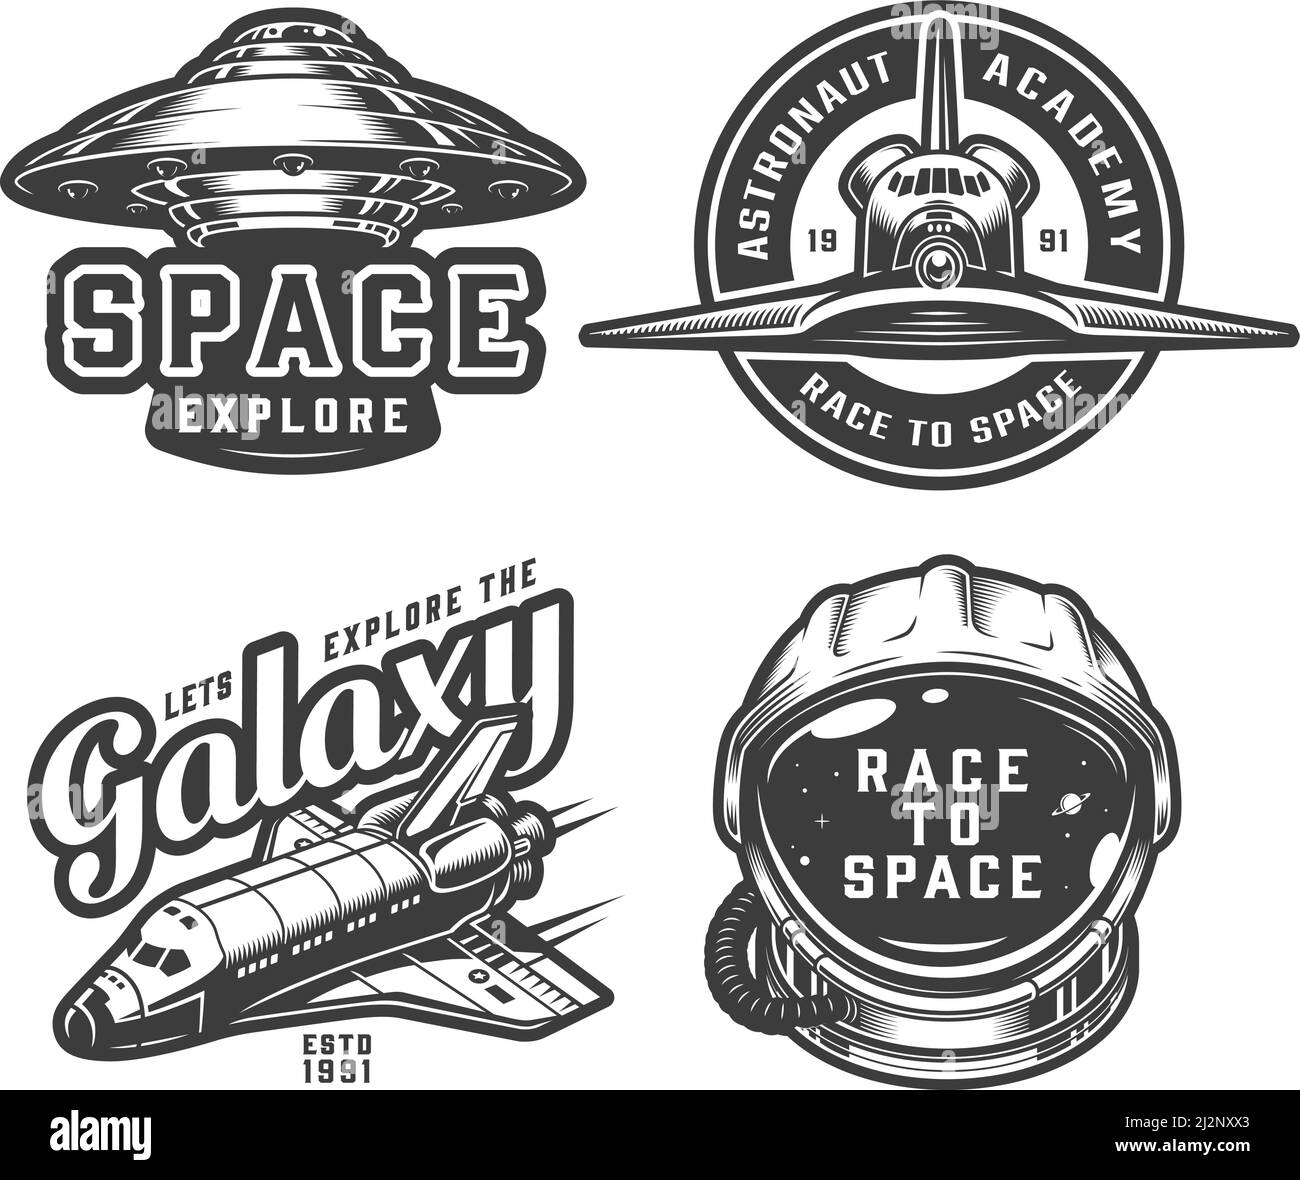 Vintage space logos collection with shuttle ufo astronaut helmet and spaceship front view in monochrome style isolated vector illustration Stock Vector